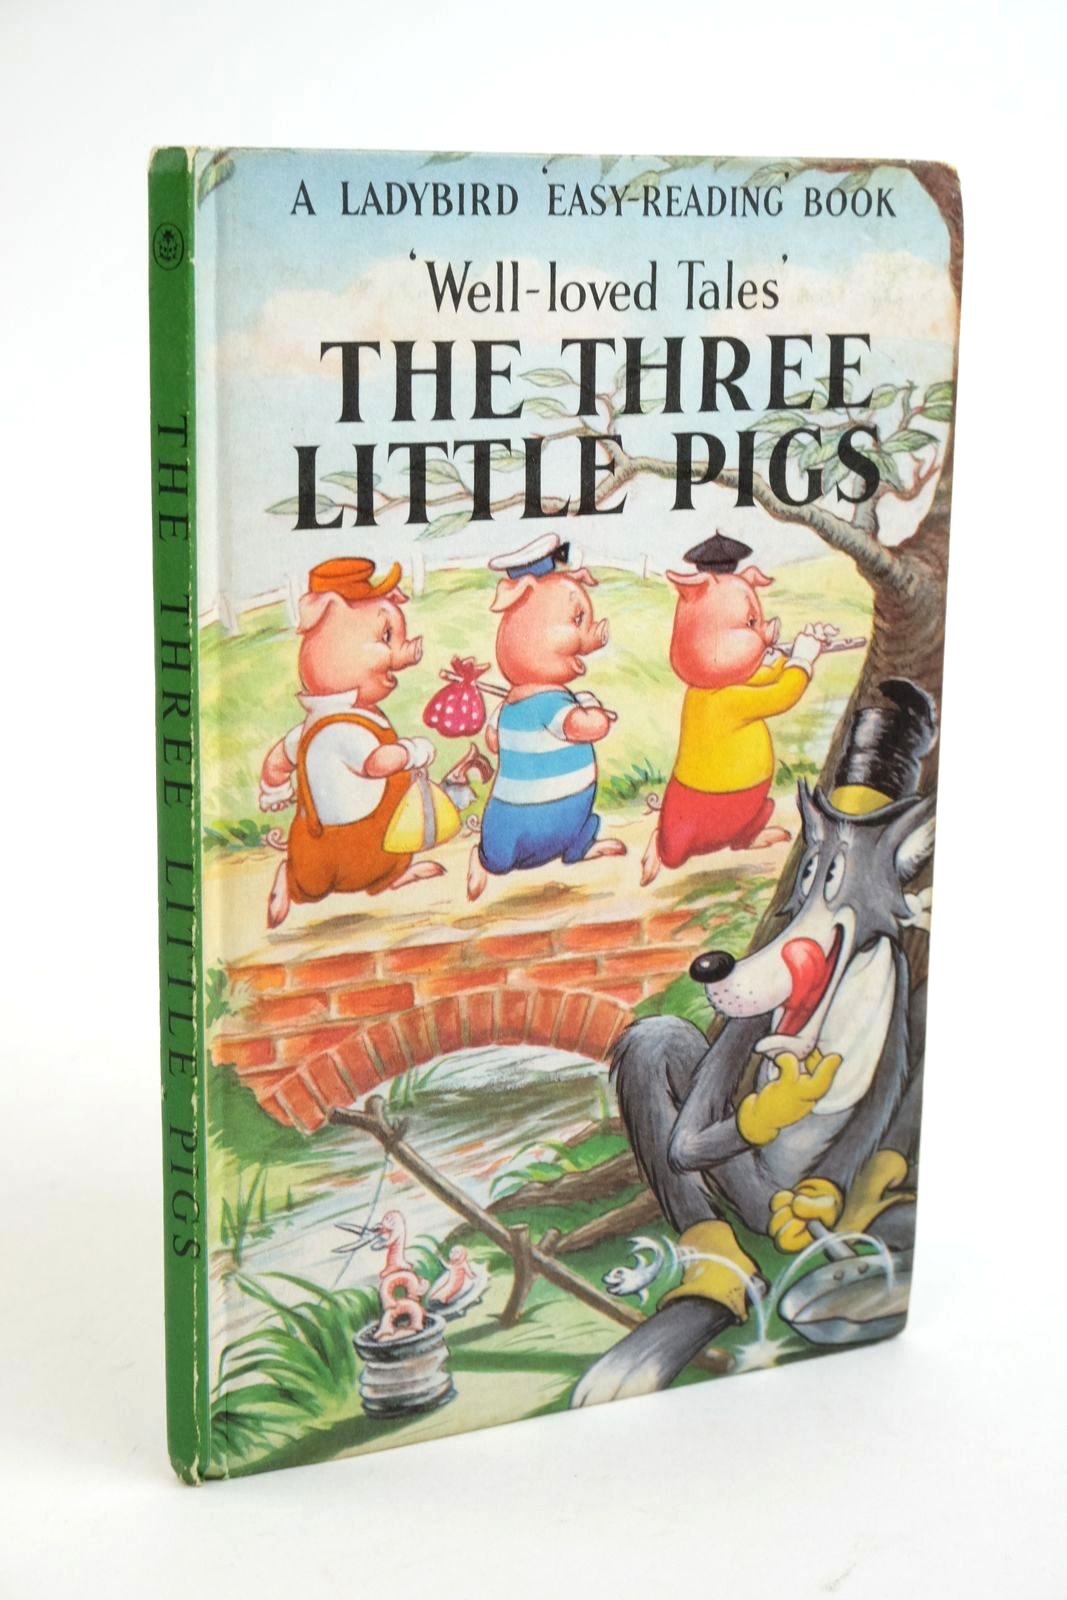 Photo of THE THREE LITTLE PIGS written by Southgate, Vera illustrated by Lumley, Robert published by Wills & Hepworth Ltd. (STOCK CODE: 1322097)  for sale by Stella & Rose's Books